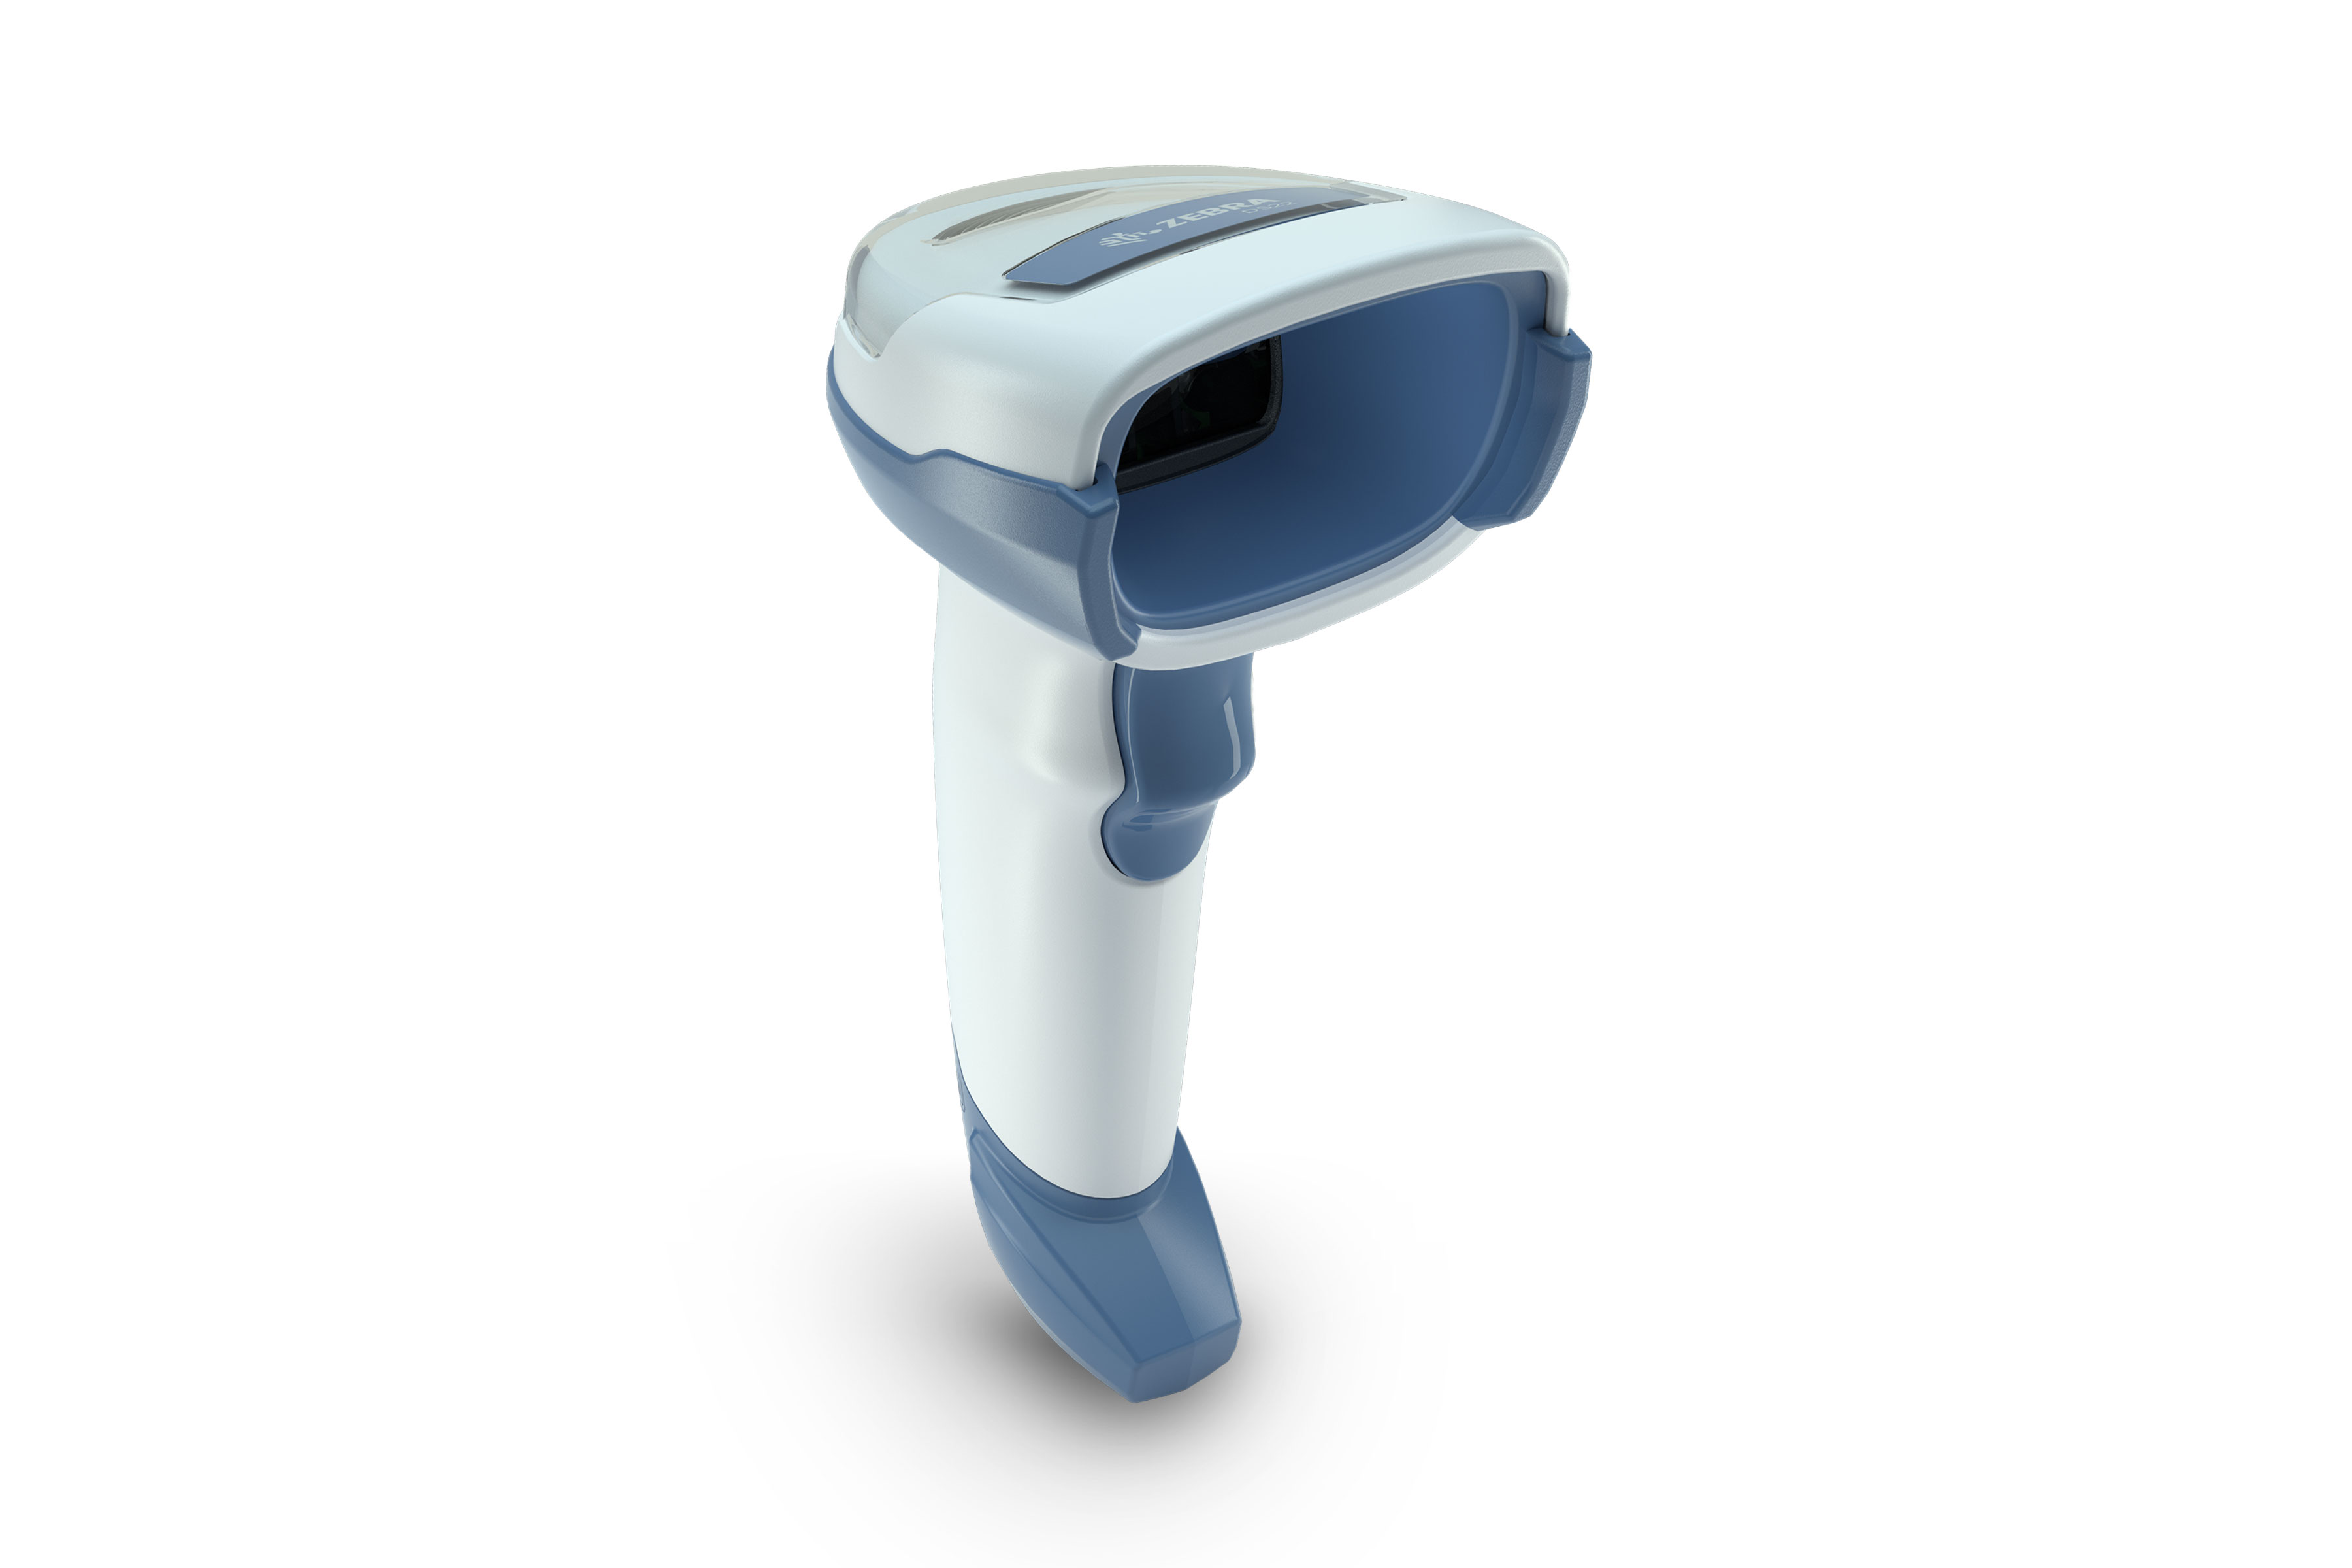 Zebra DS2208 handheld barcode scanner for healthcare , white and blue hardware